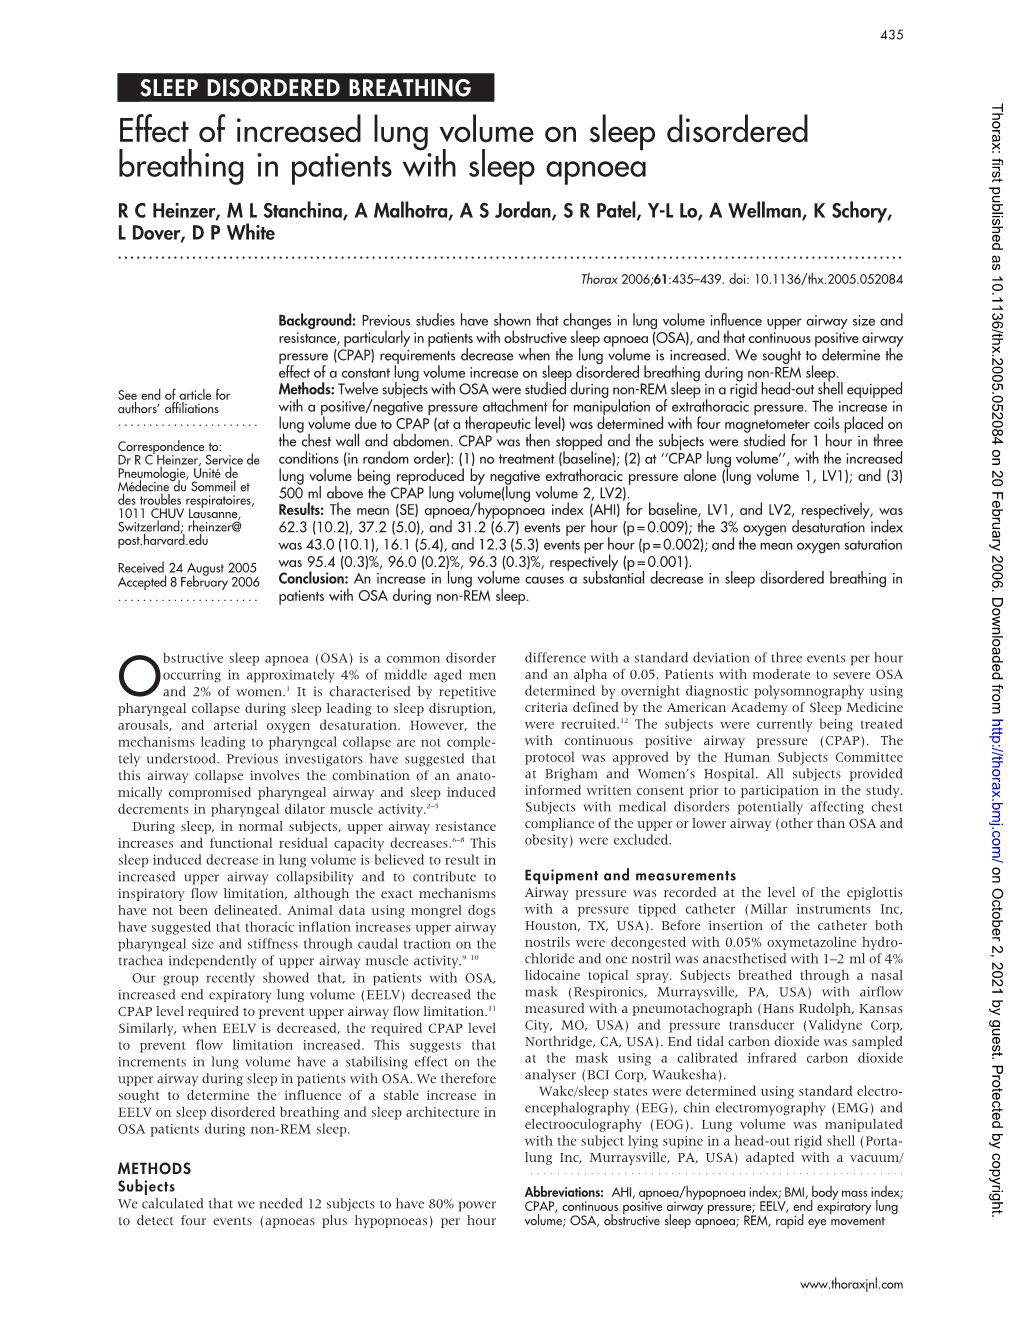 Effect of Increased Lung Volume on Sleep Disordered